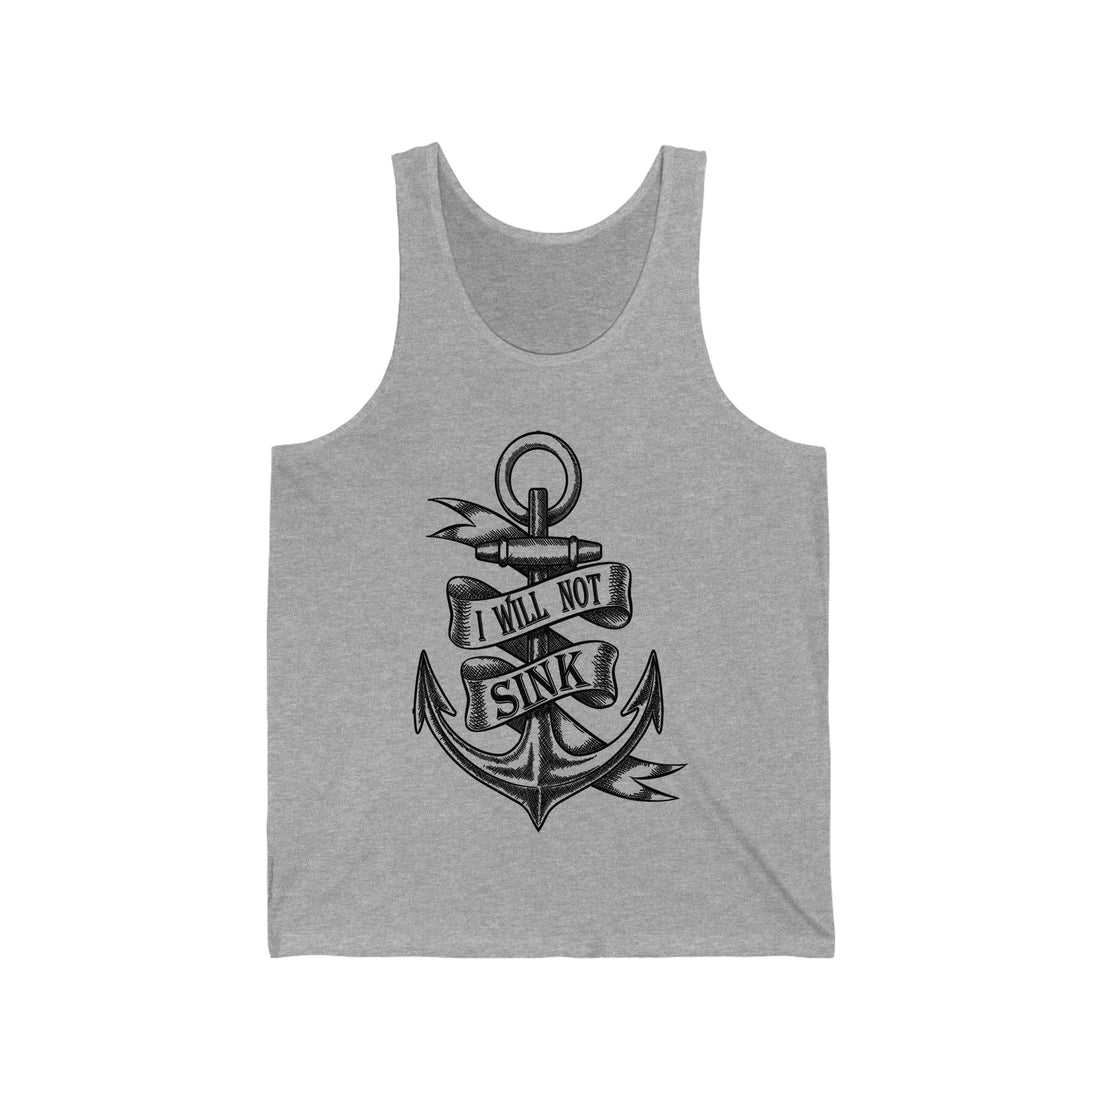 I Will Not Sink - Unisex Jersey Tank Top